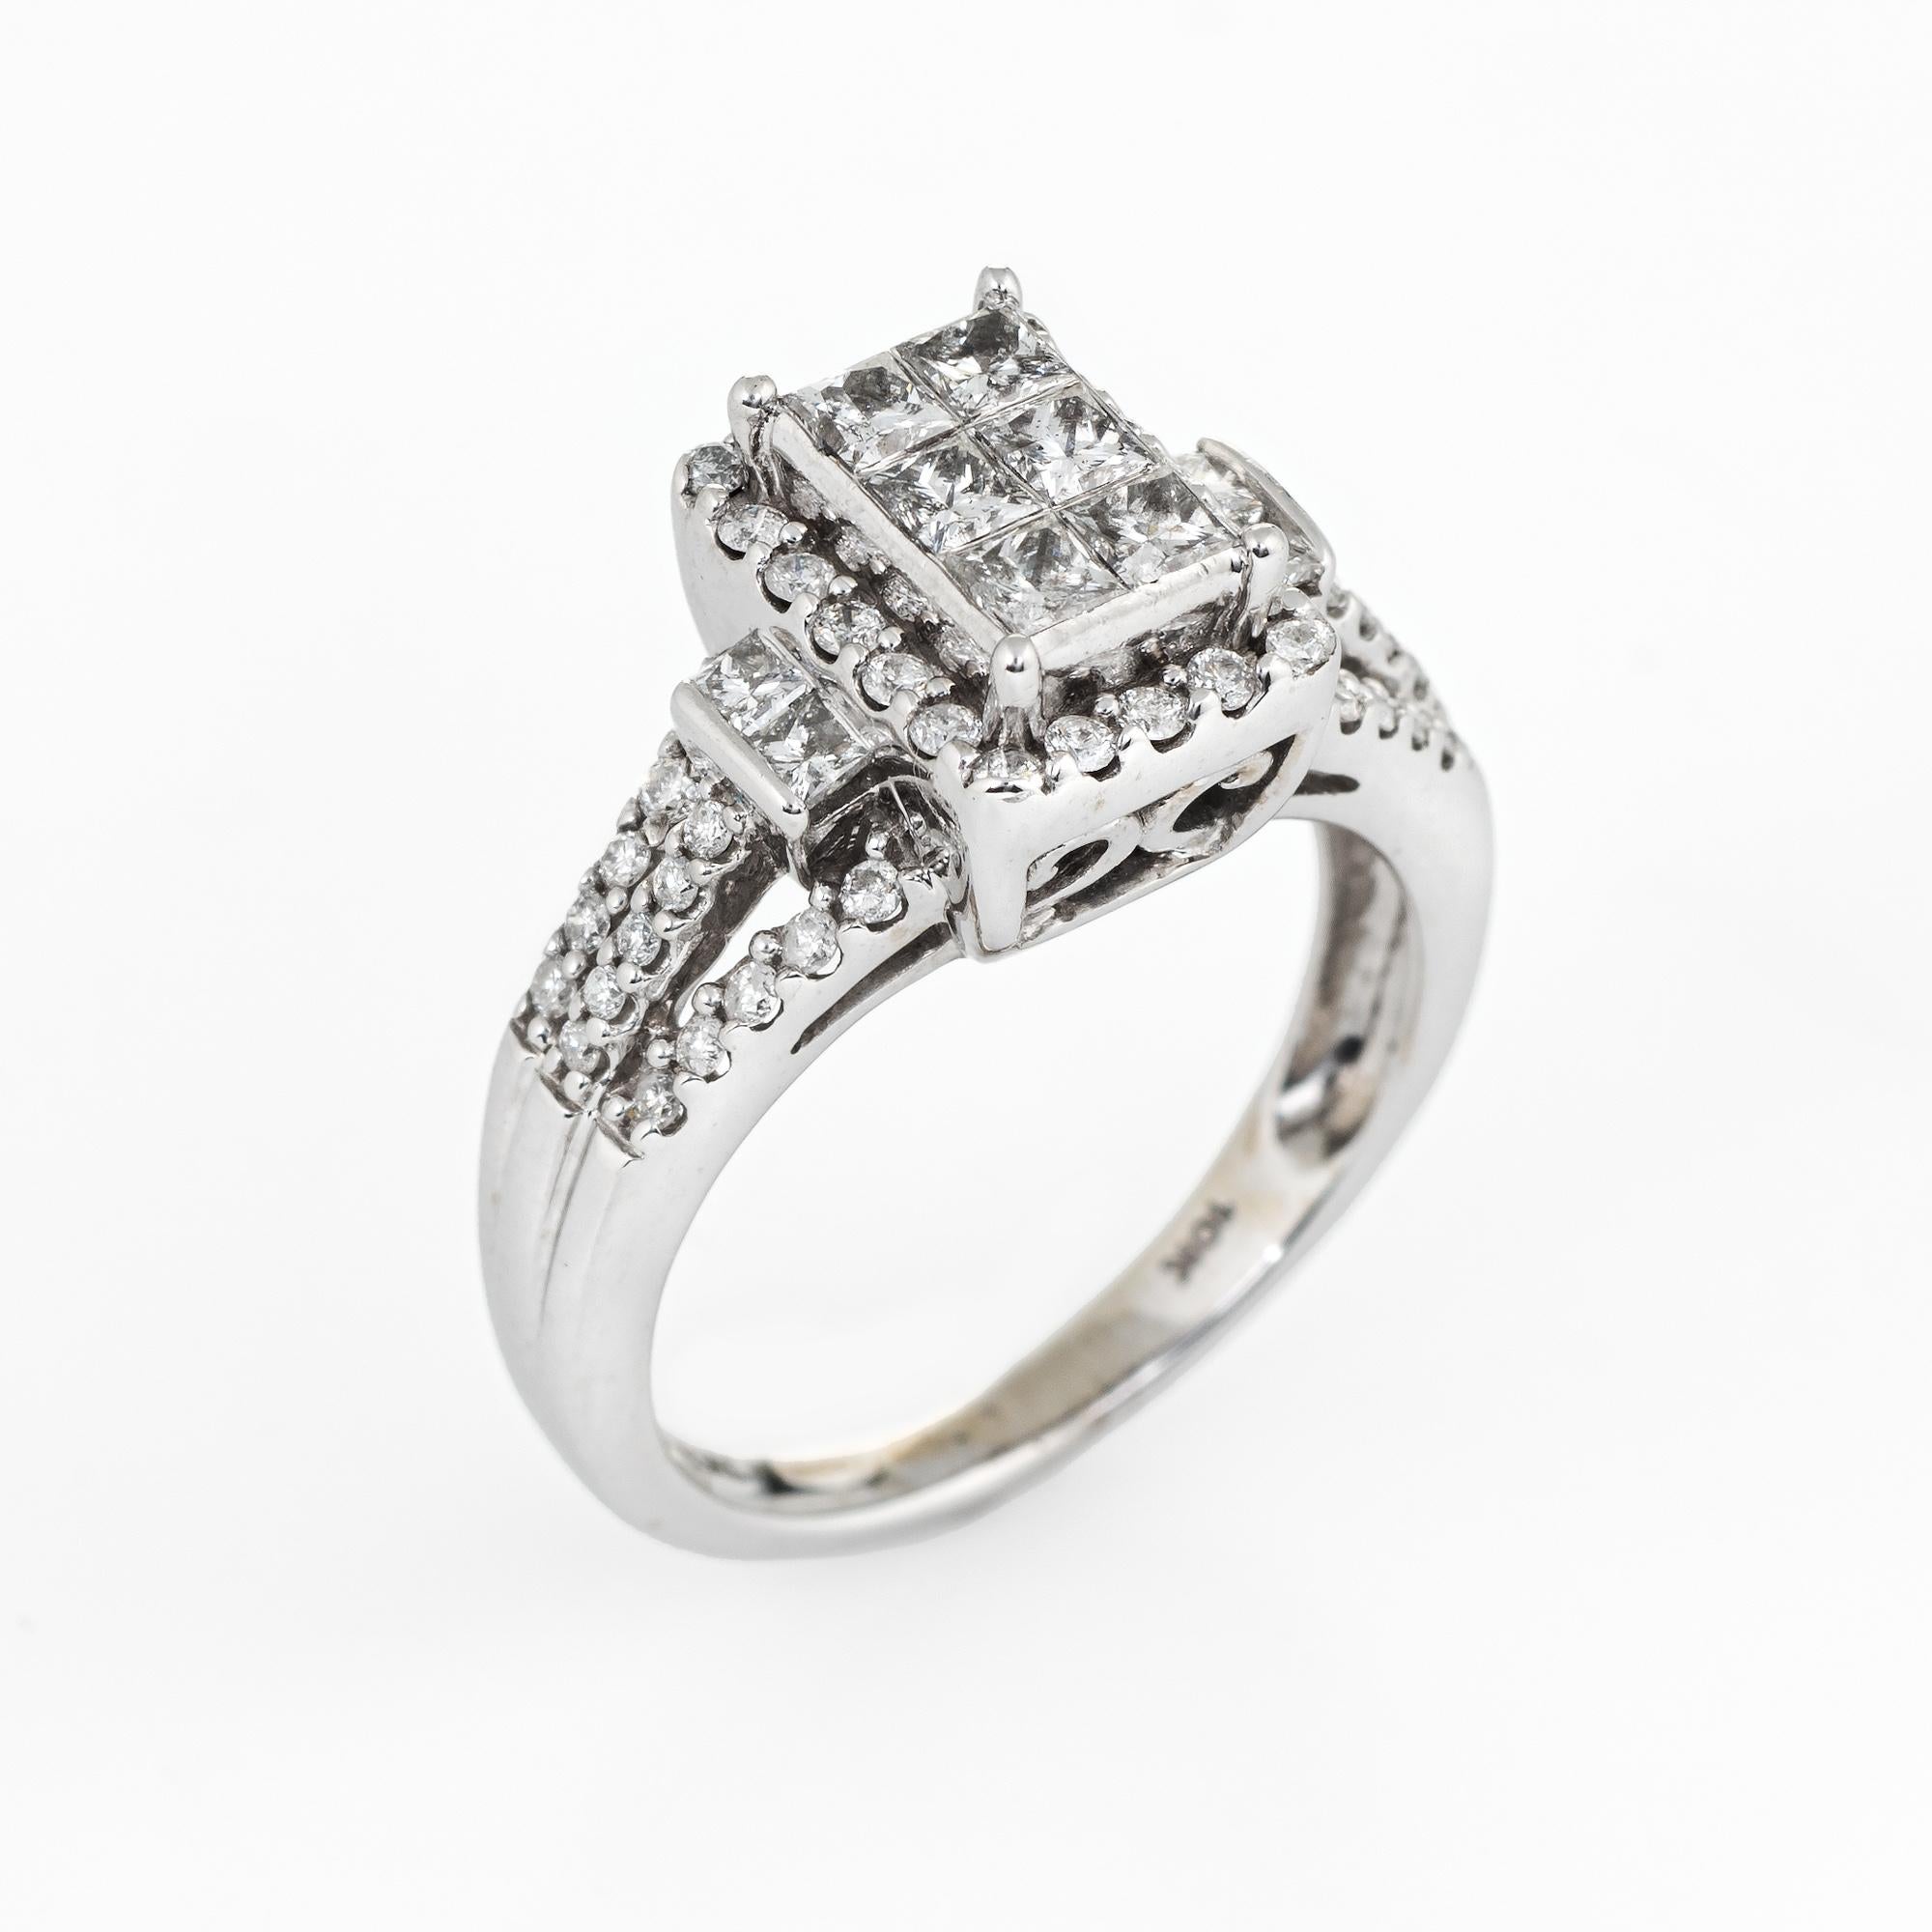 Elegant diamond cluster ring crafted in 10 karat white gold. 

Six princess cut diamonds are illusion set into the square mount, accented with round brilliant cut diamonds. The total diamond weight is estimated at 1.06 carats (estimated at H-I color